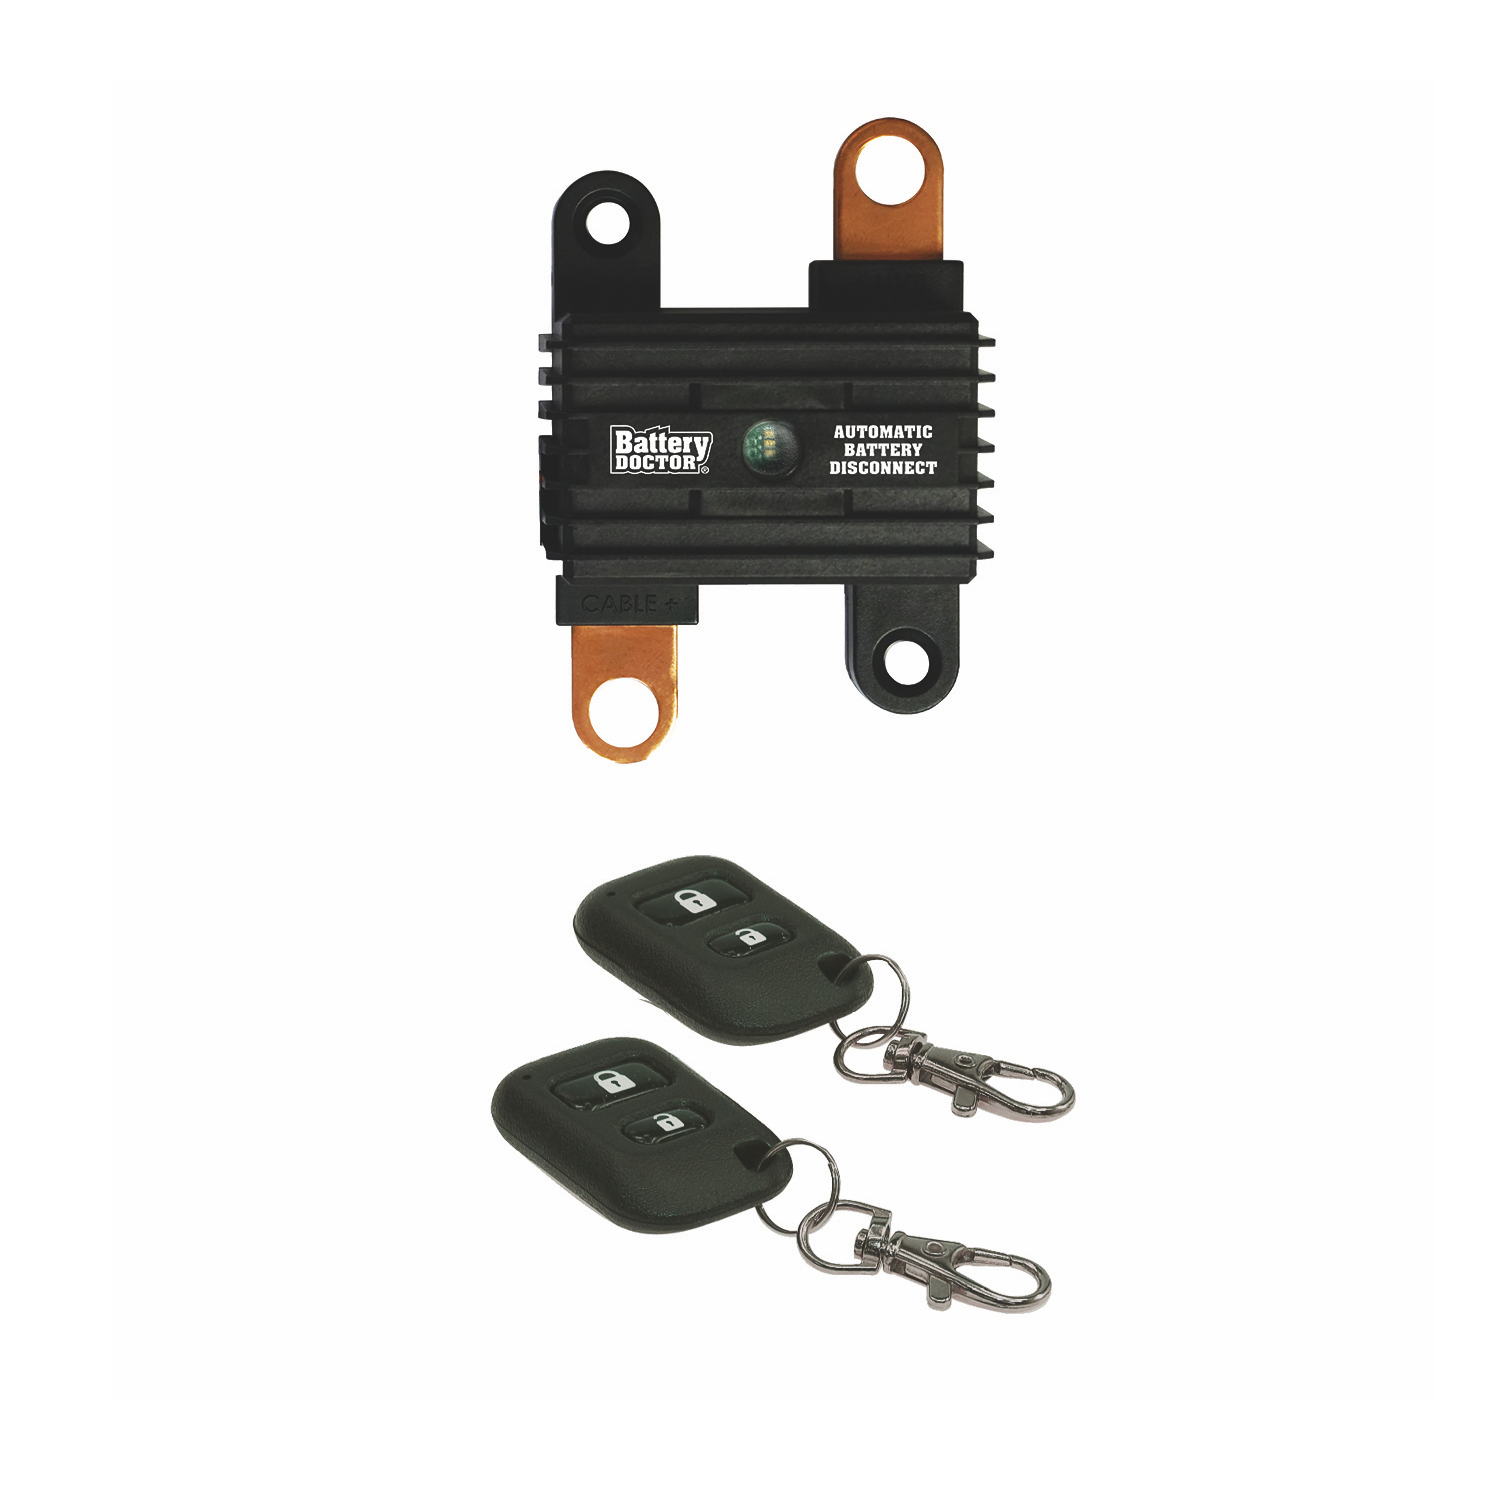 Wirthco Rolls Out Auto Battery Disconnect Device to RV Industry RV PRO